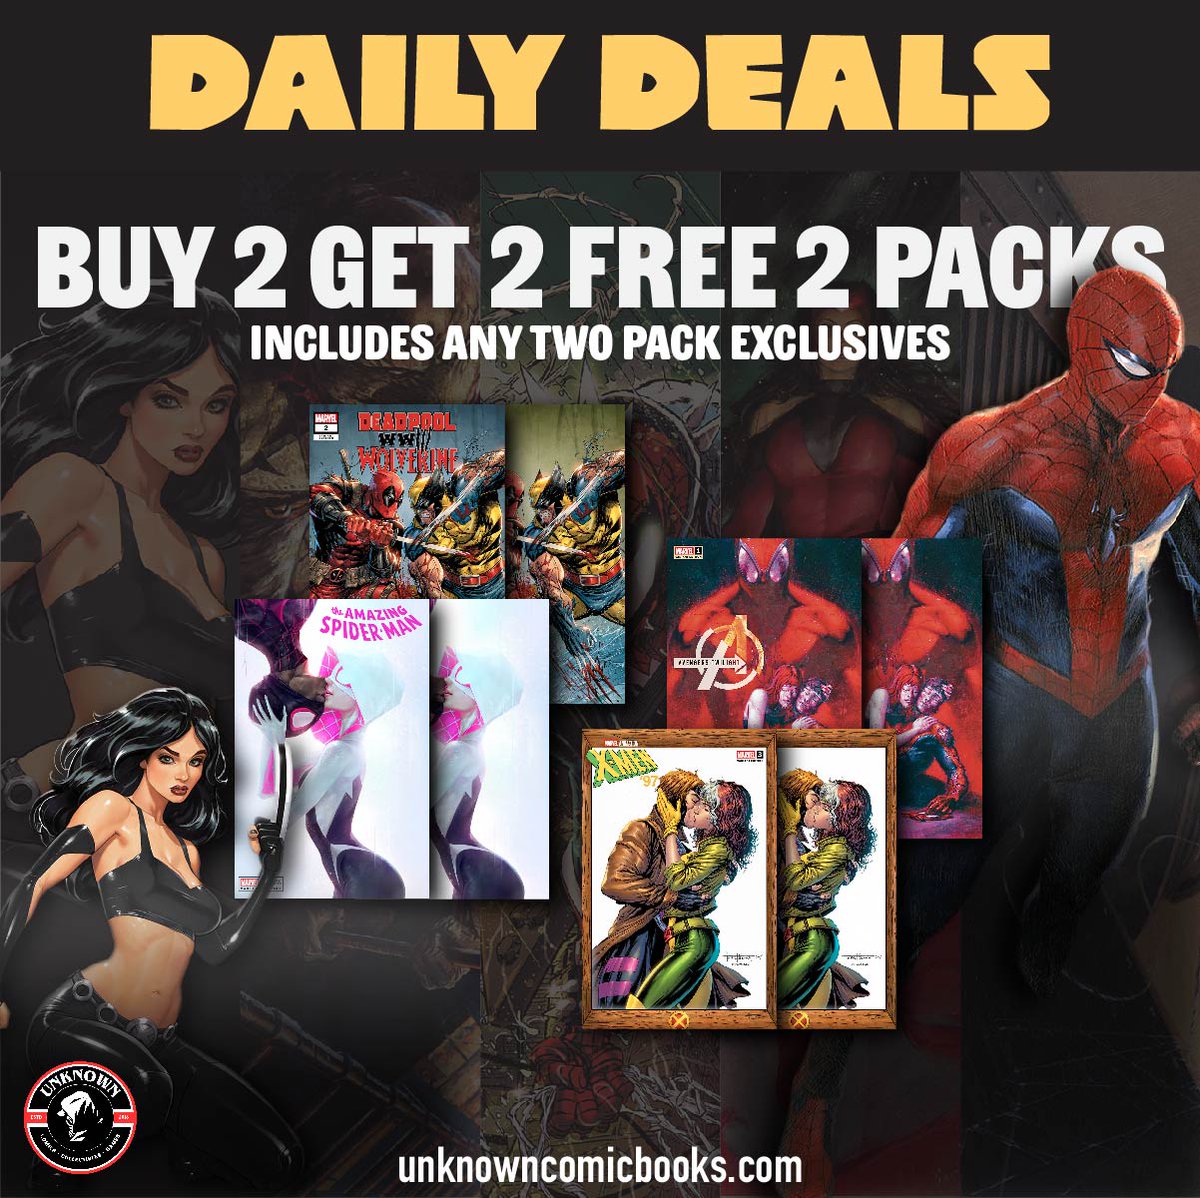 Stock Up on Exclusives: Buy 2 Get 2 FREE!
** Buy 2 Unknown Comics Exclusive 2-packs & get 2 MORE FREE!** Hundreds of titles to choose from! Limited time offer, don't miss out! UnknownComicBooks.com #BOGO #ExclusiveComics #Comics #DealOfTheDay